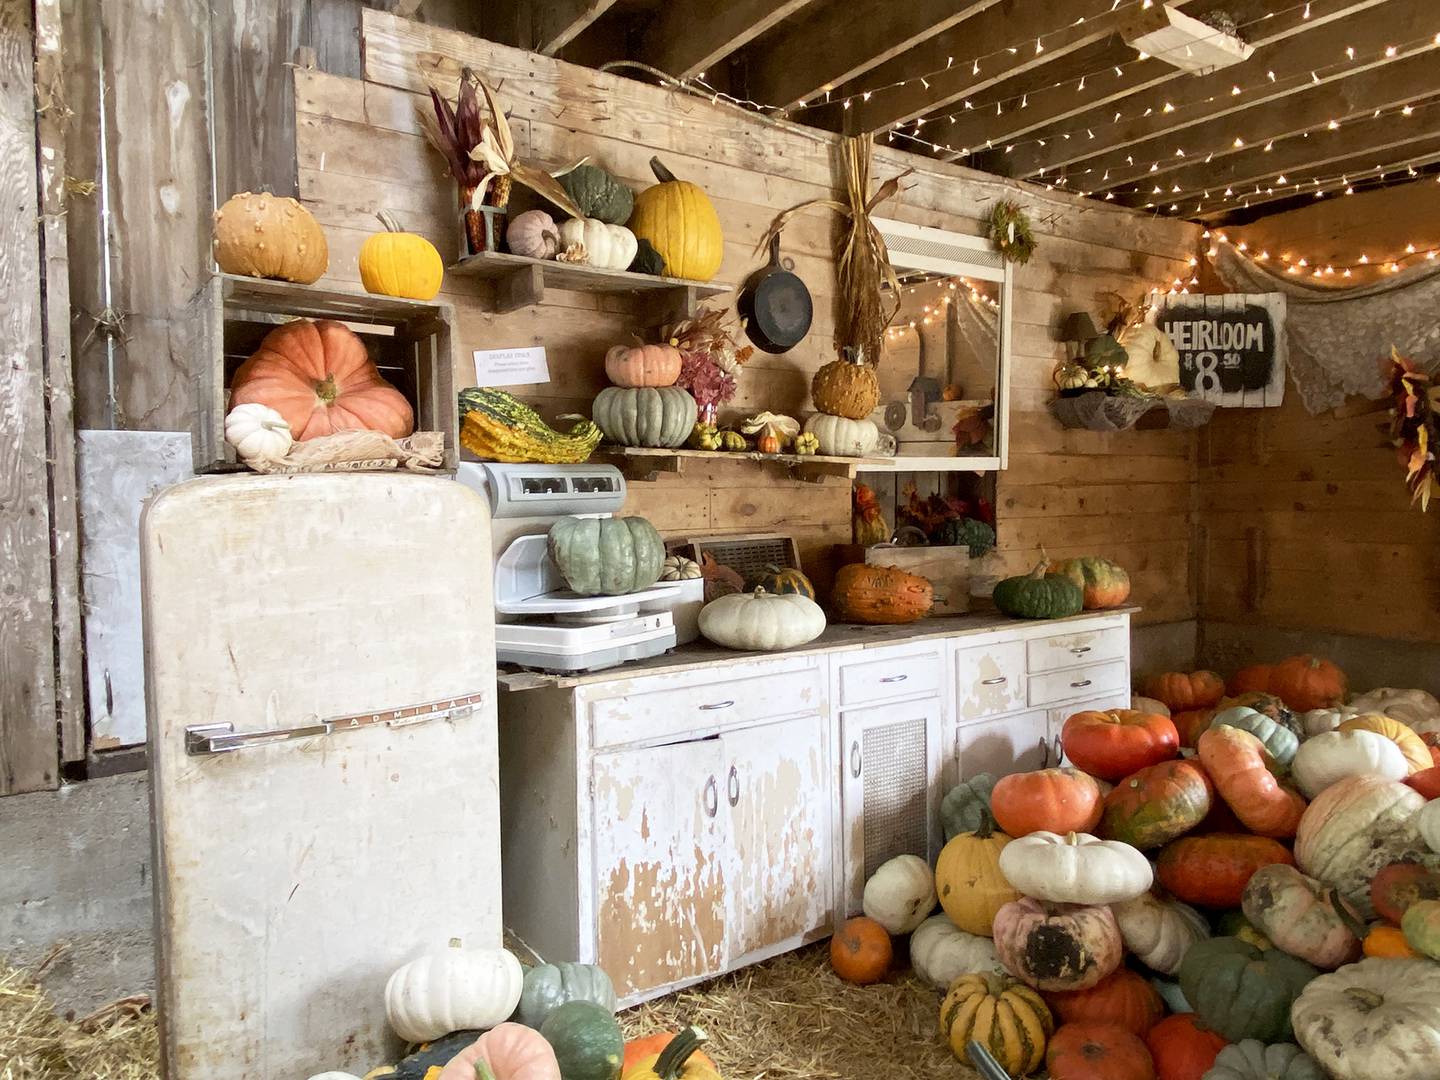 The small, detailed scenes created by Mikaya Huggins, general manager at Sugar Grove Pumpkin Farm, make the perfect setting for Instagram-worthy photos.